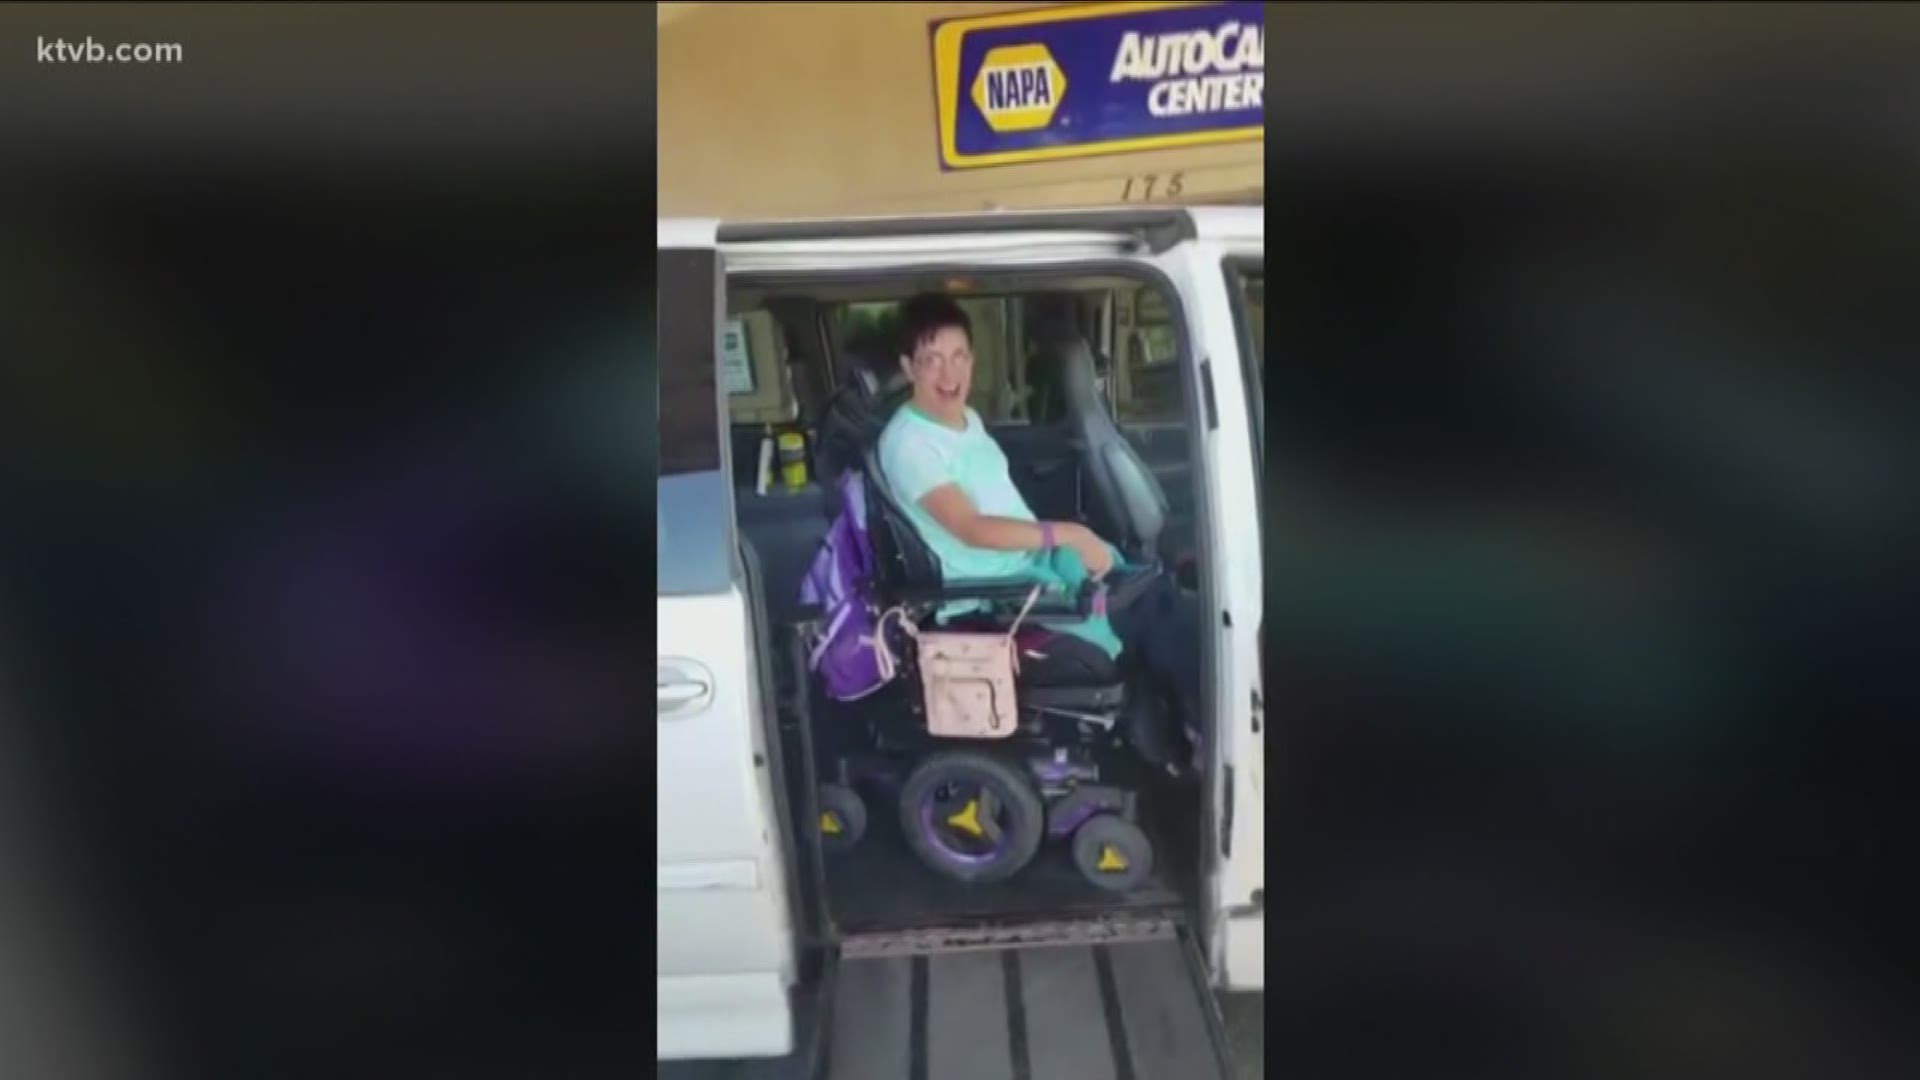 A Boise woman found herself in quite a bind when her specially-adapted van broke down. Kristyn Herbert has cerebral palsy and uses a power chair. She depends on her support staff to drive her around so she can take on her busy life. The van stopped running earlier this summer.